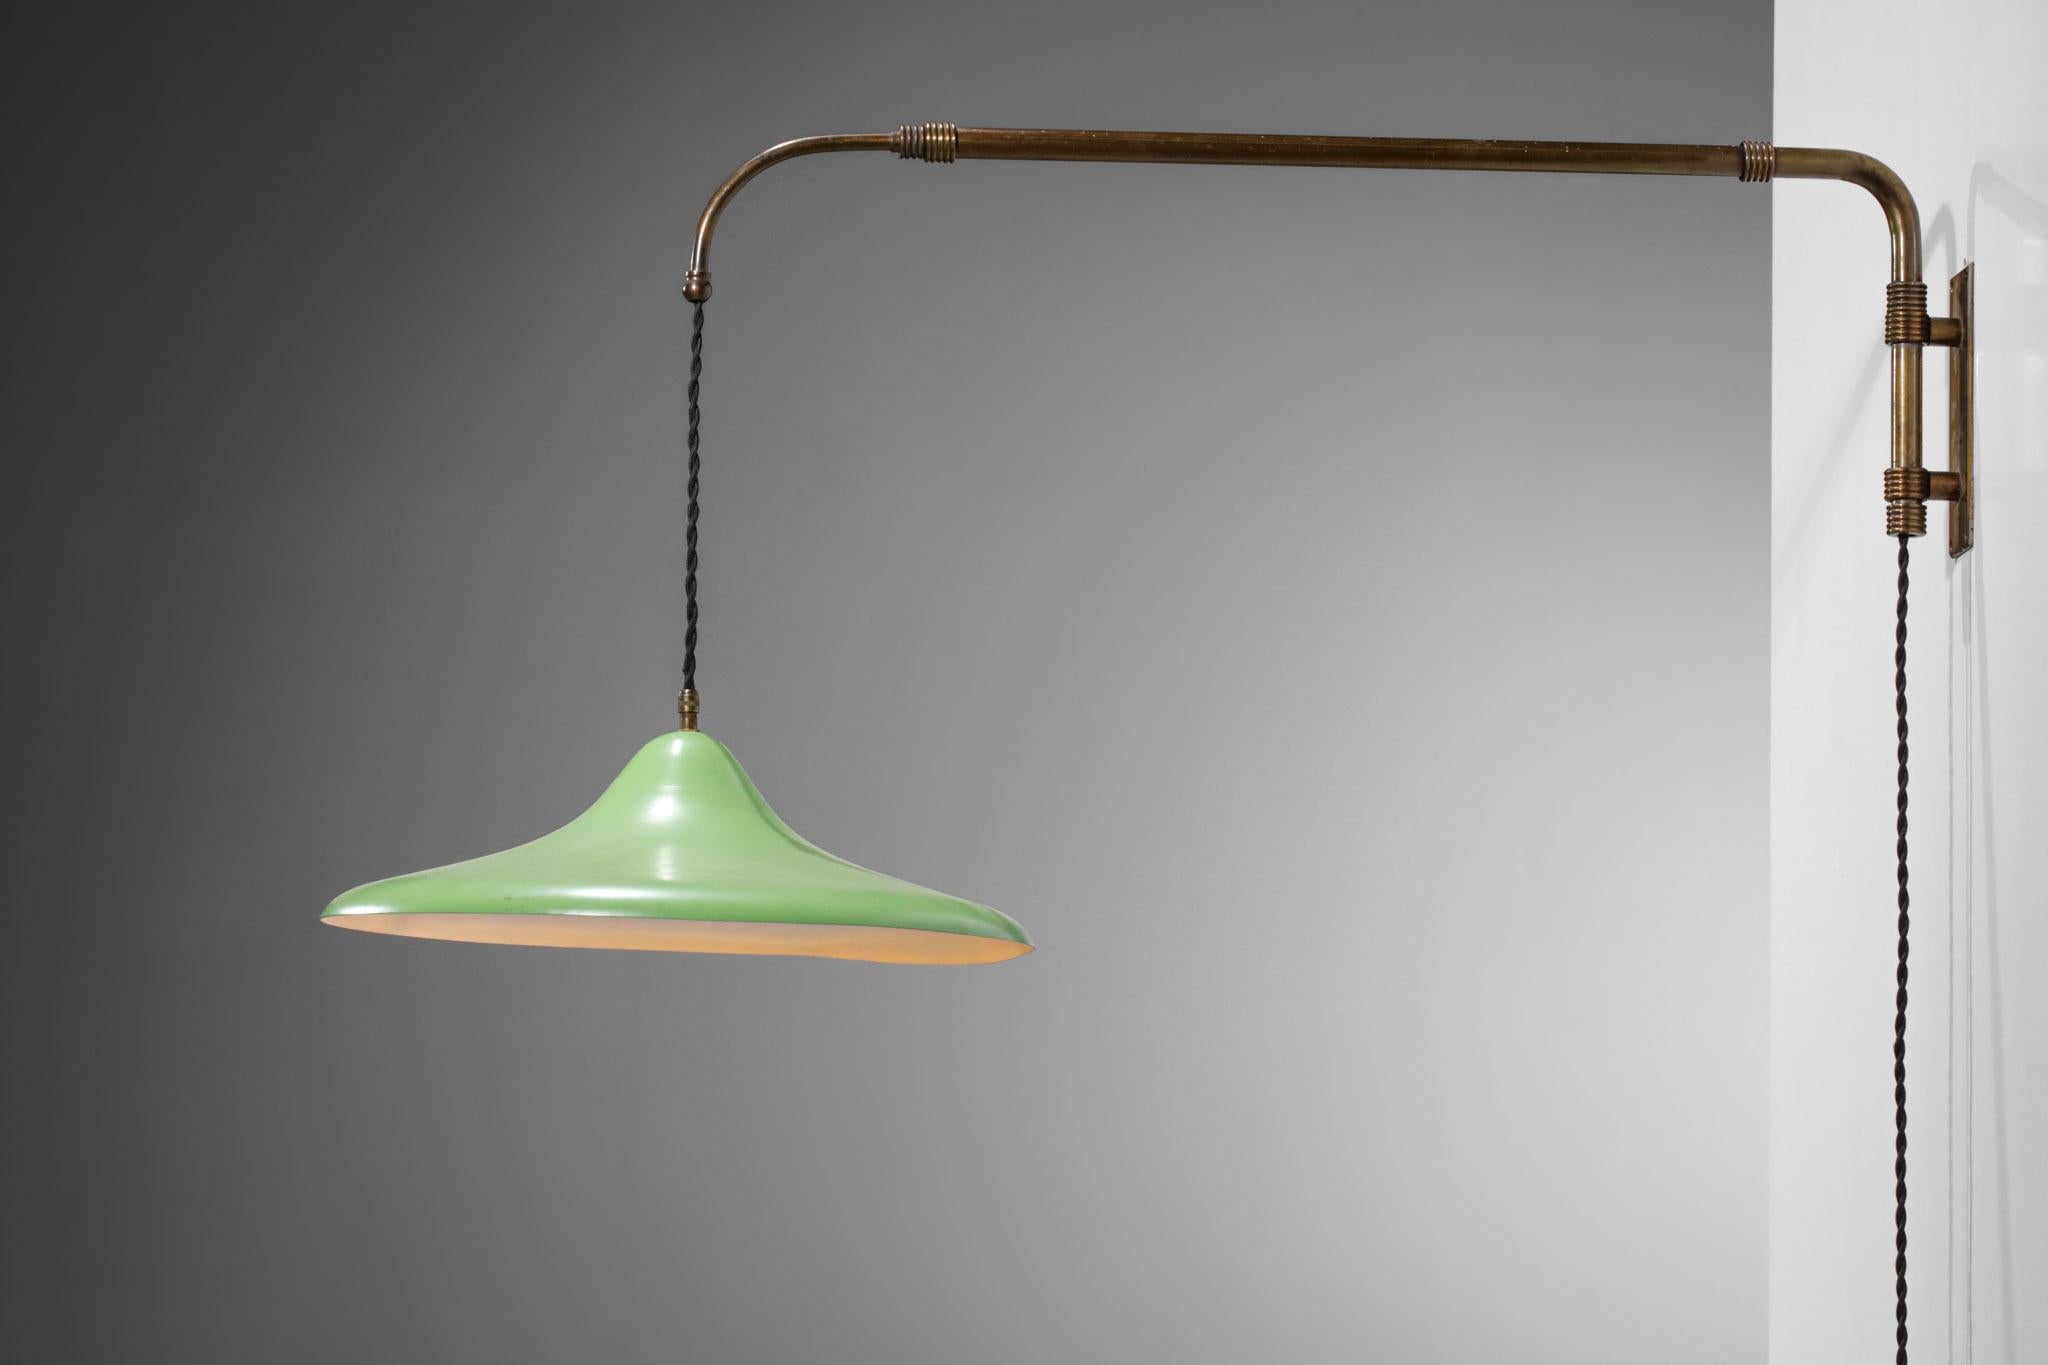 Italian telescopic bracket from the 50's in the style of Arredoluce's work. Structure and counterweight in solid brass, shade in almond green lacquered metal. Counterweight and pulley to modulate the height of the diffuser and the length of the stem